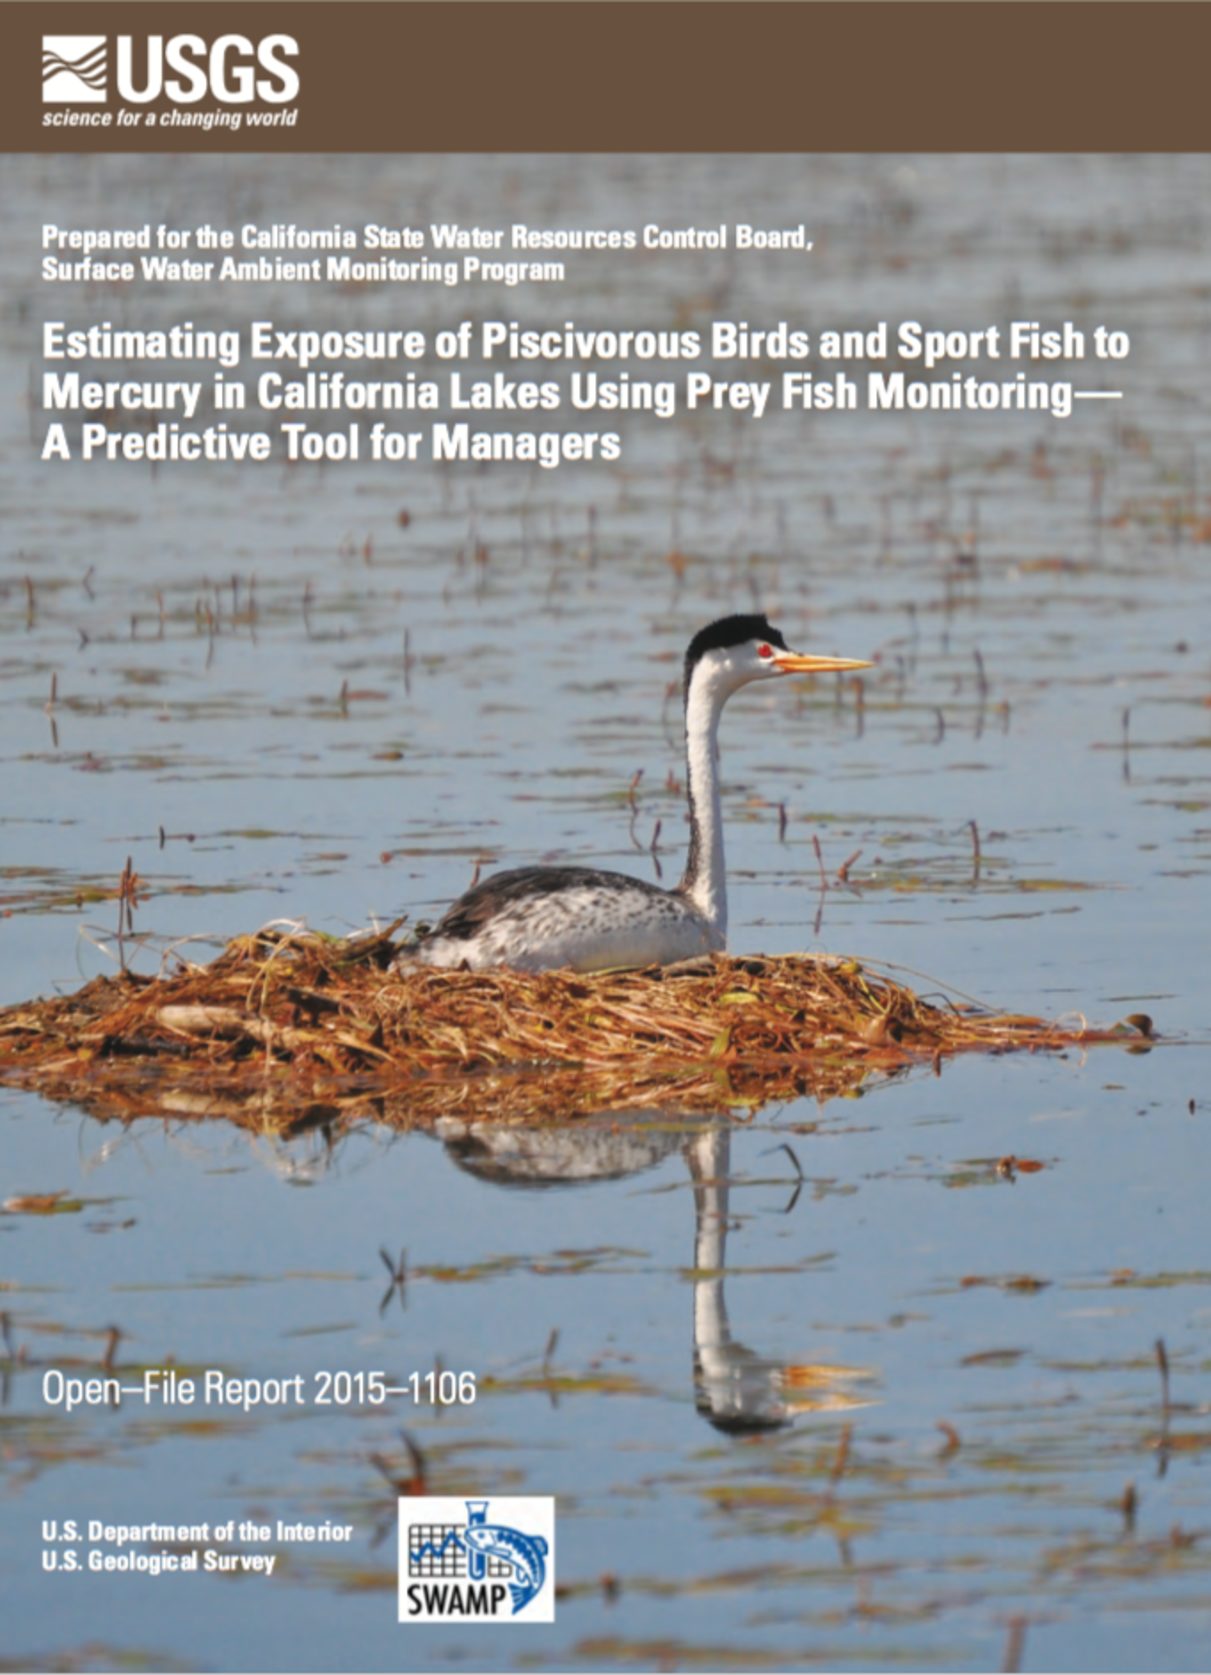 Estimating Exposure of Piscivorous Birds and Sport Fish to Mercury in California Lakes Using Prey Fish Monitoring—A Predictive Tool for Managers